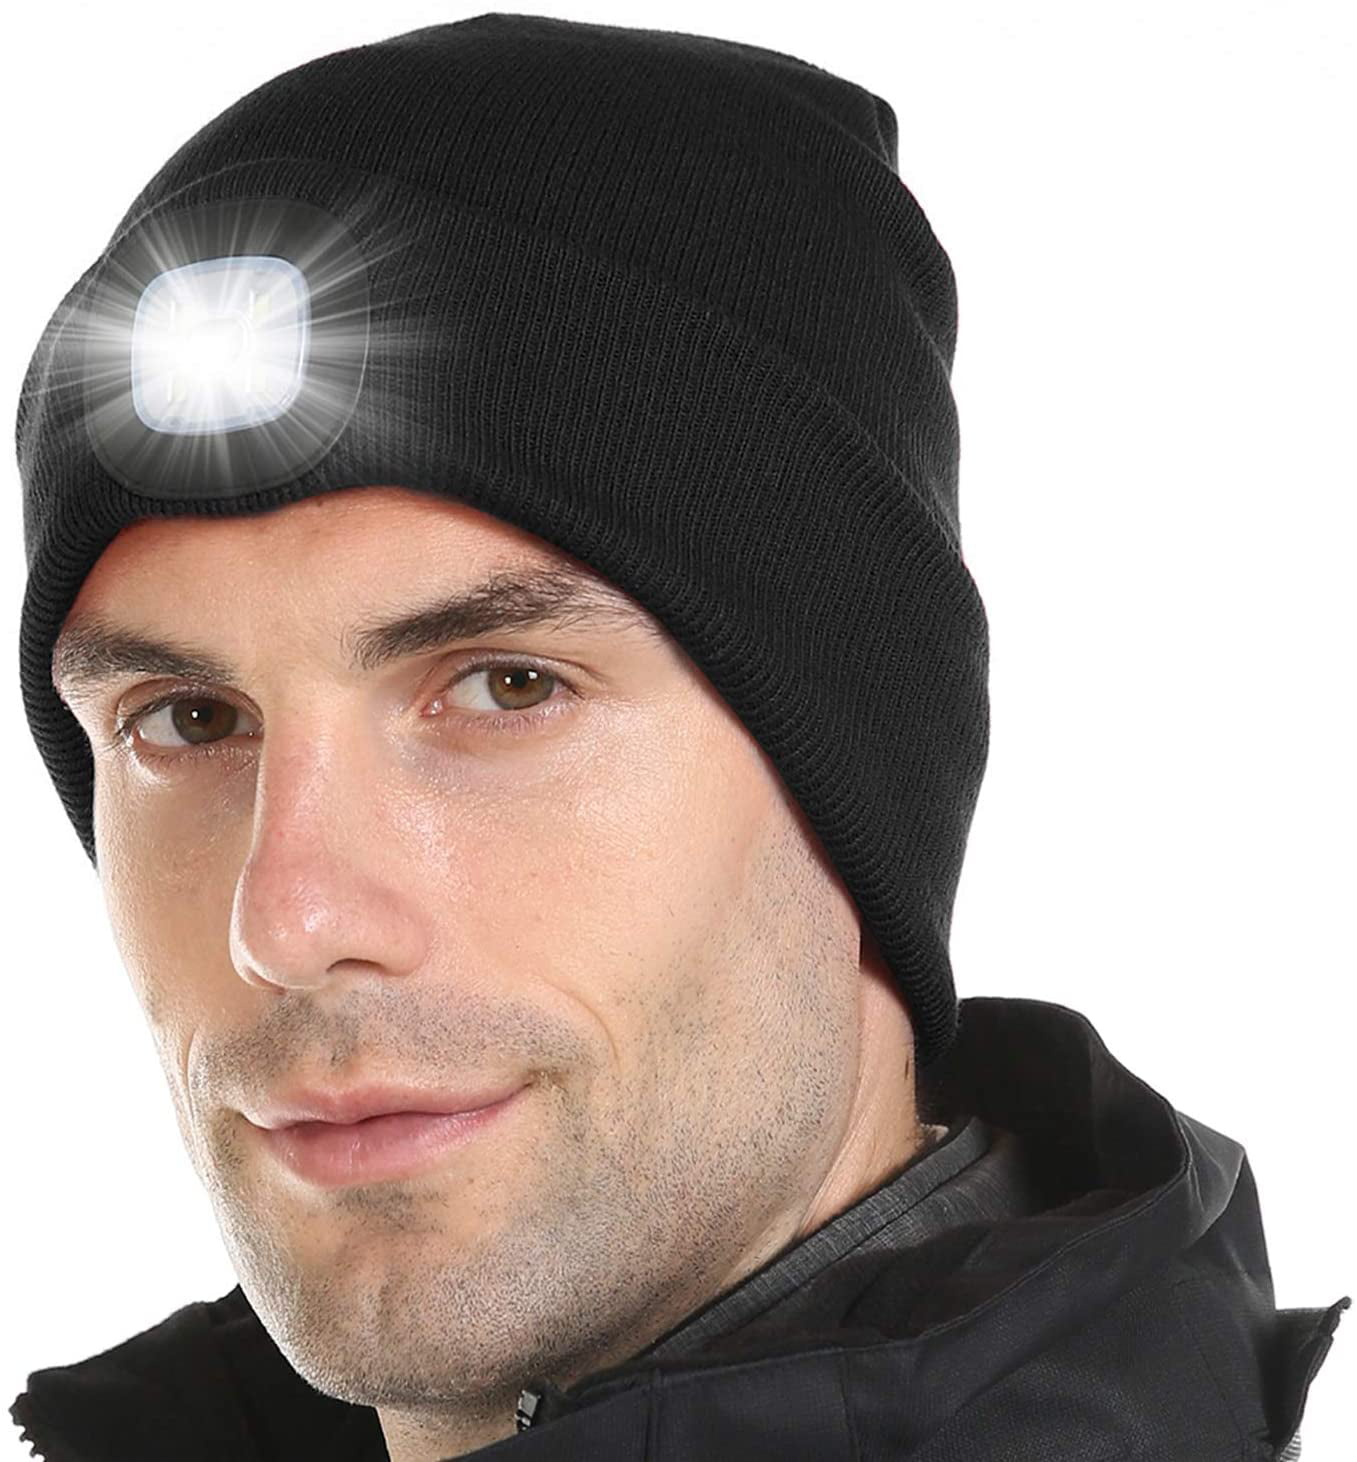 Hiking USB Rechargeable 4 LED Headlamp Cap Auto Repair Unisex Warm Winter Knitted Beanie Hat with LED Flashlight for Hunting Walking at Night Biking LALATECH LED Beanie Cap Lighted Camping 